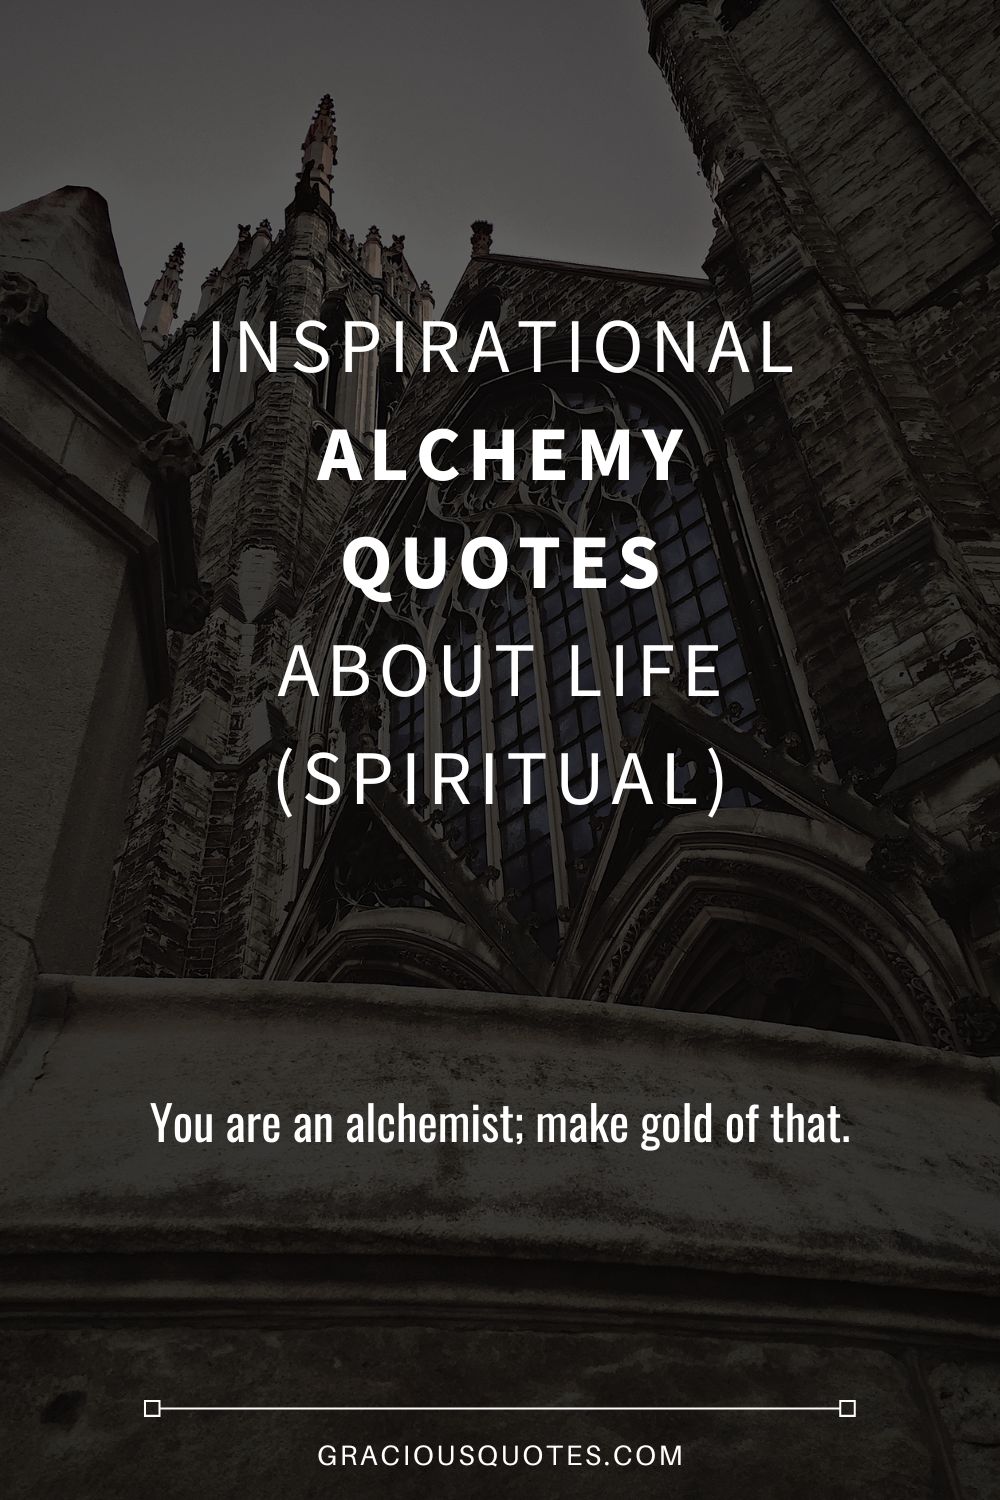 Inspirational Alchemy Quotes About Life (SPIRITUAL)